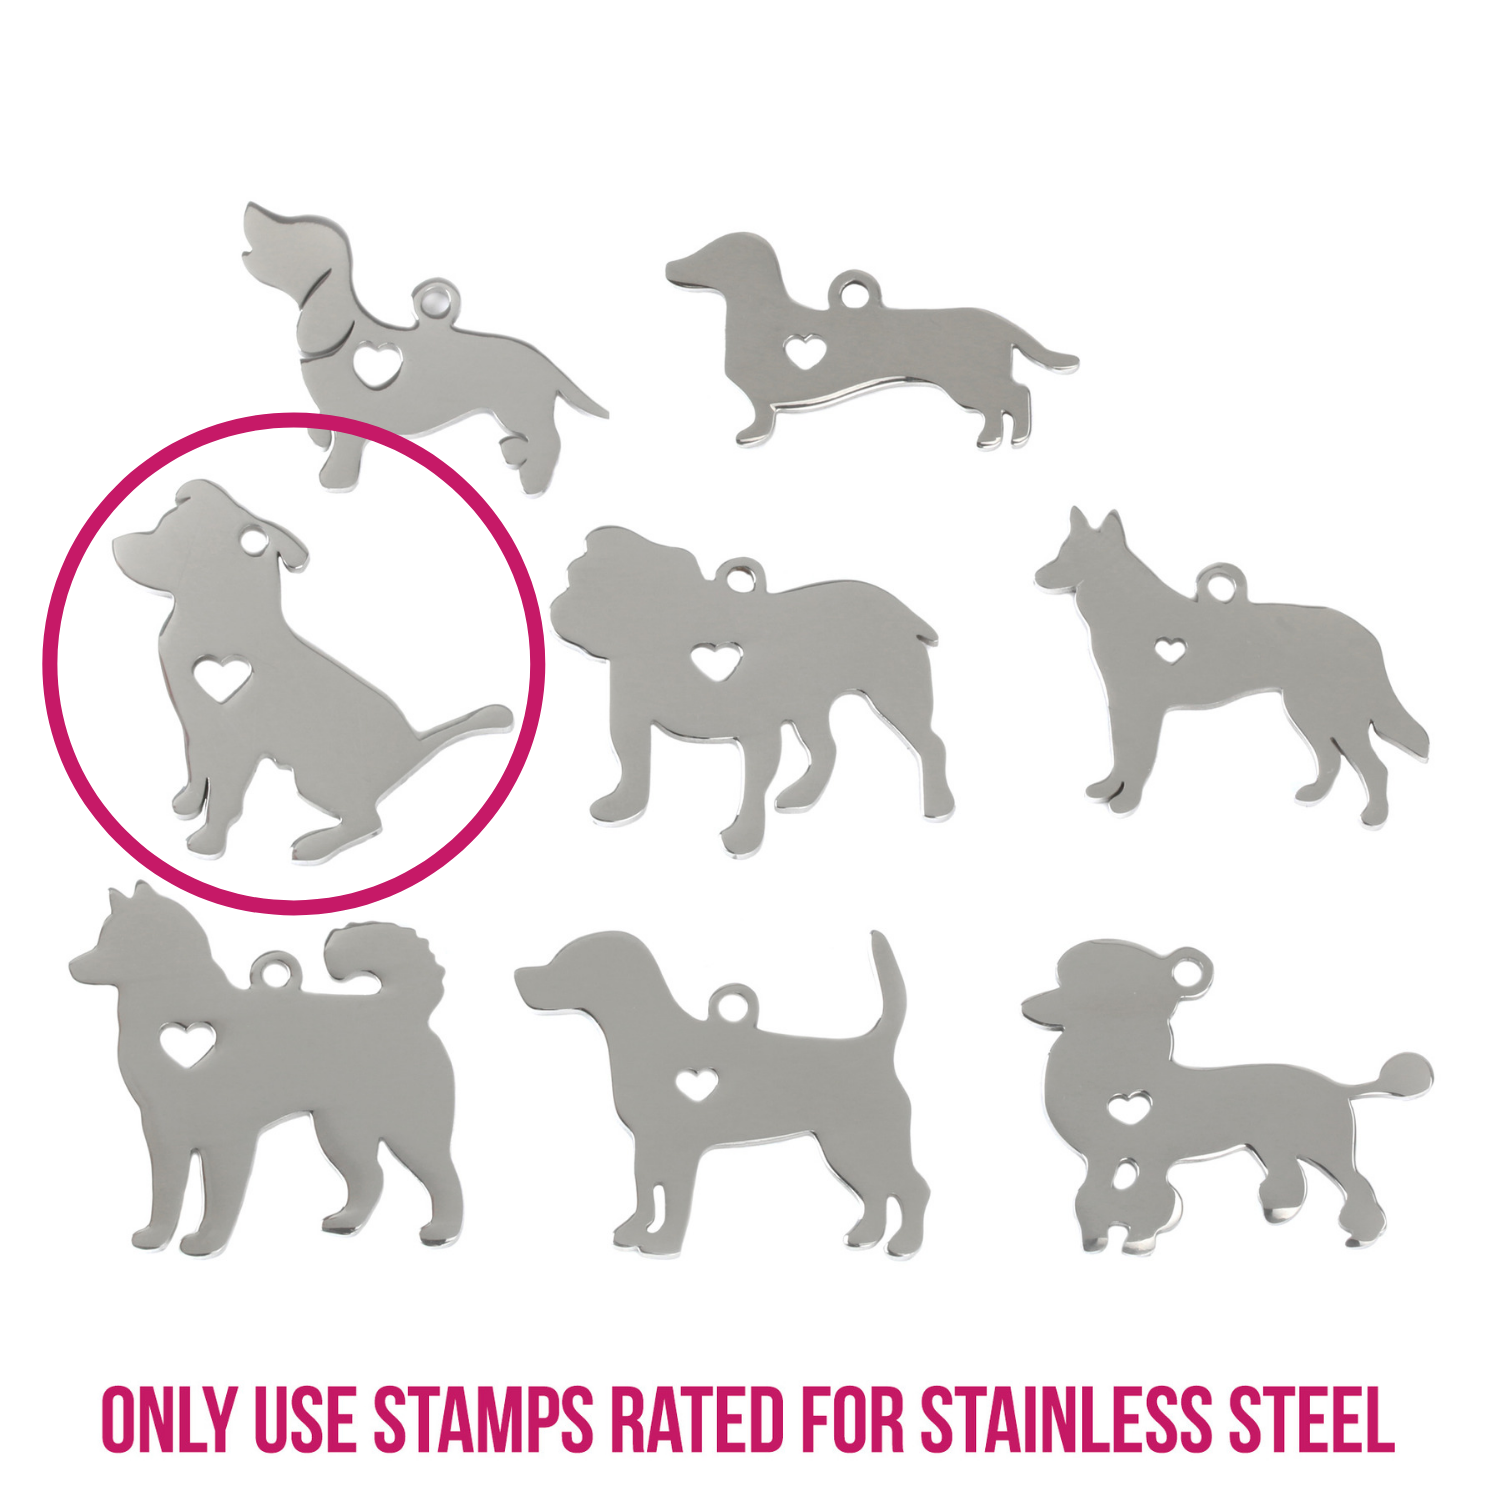 Pointer Metal Stamp  Labrador Dog Breed Jewelry Stamp – Stamp Yours